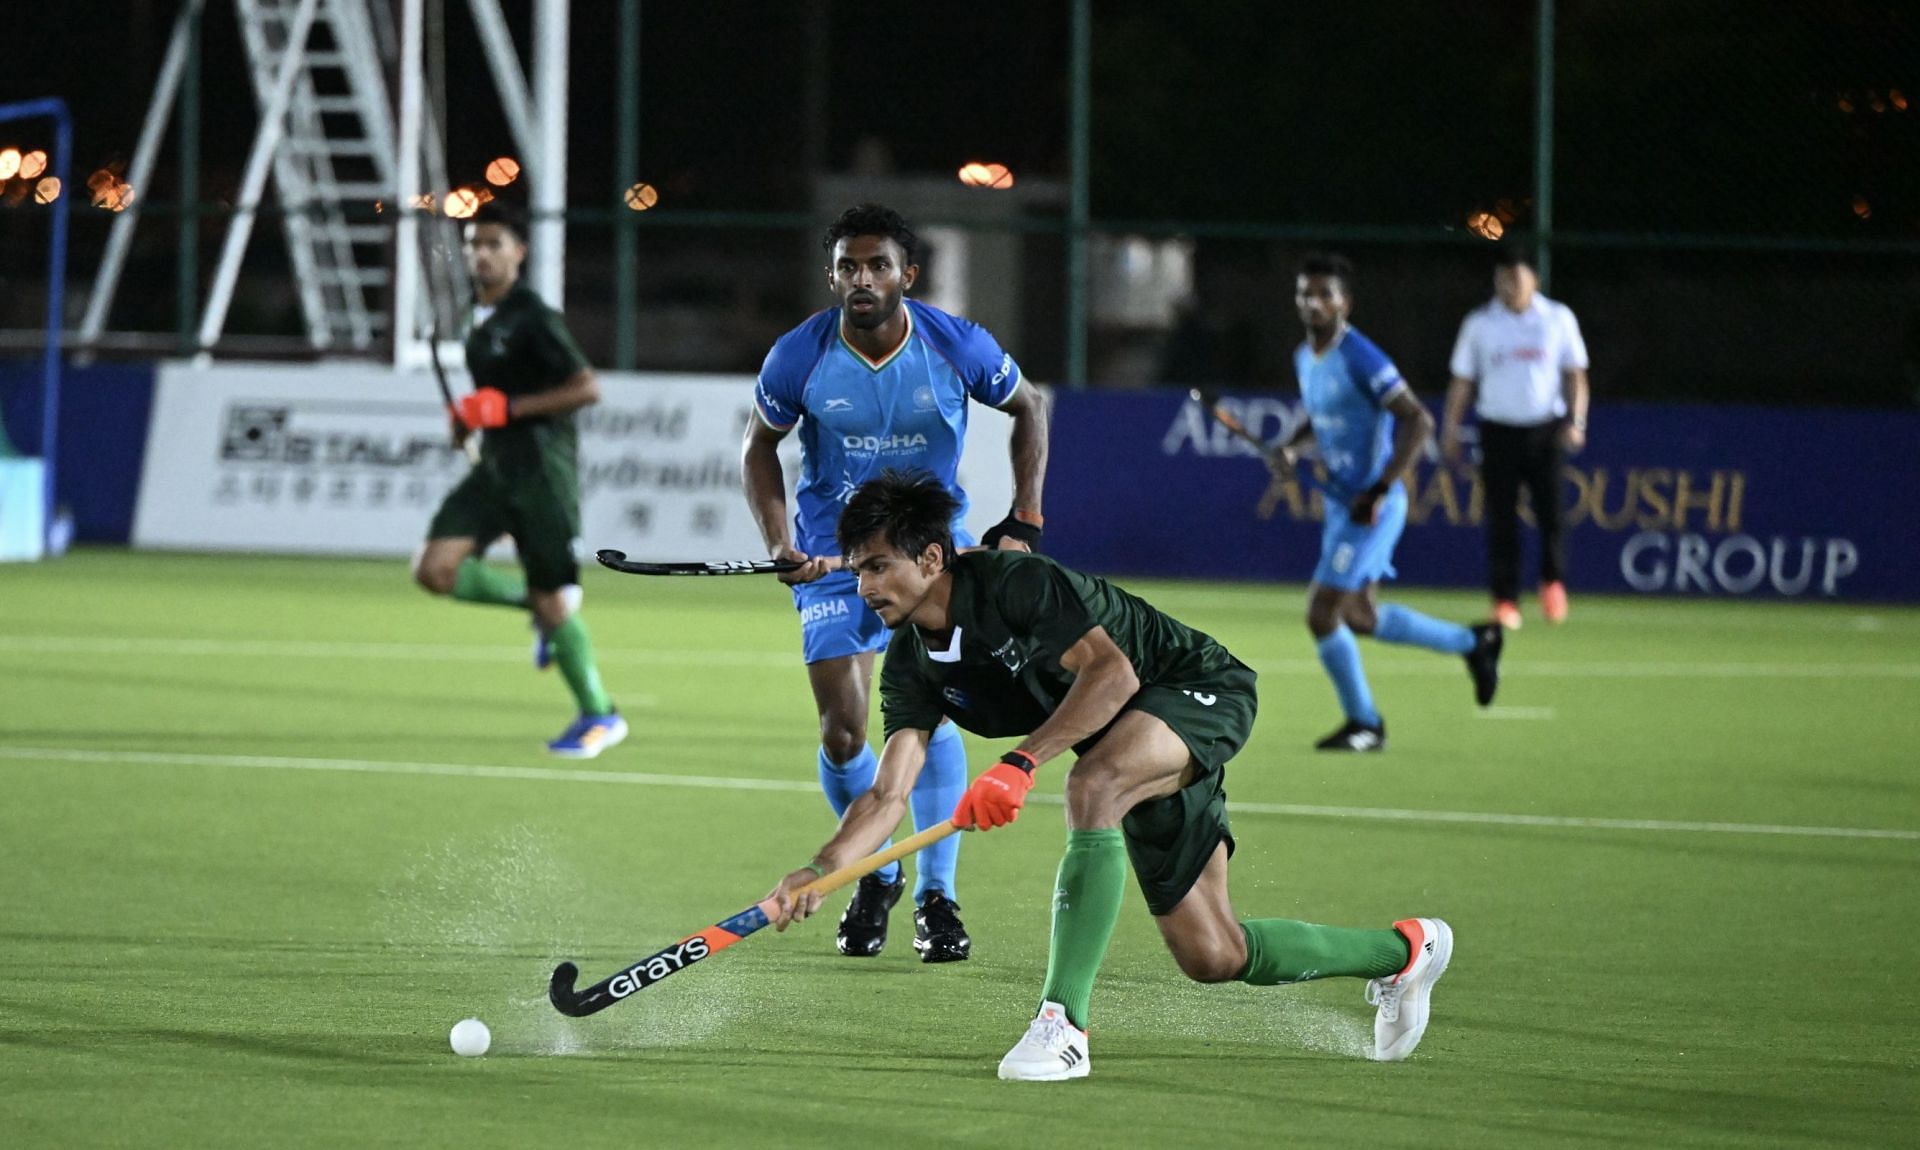 Pakistan upped the pressure in the second half